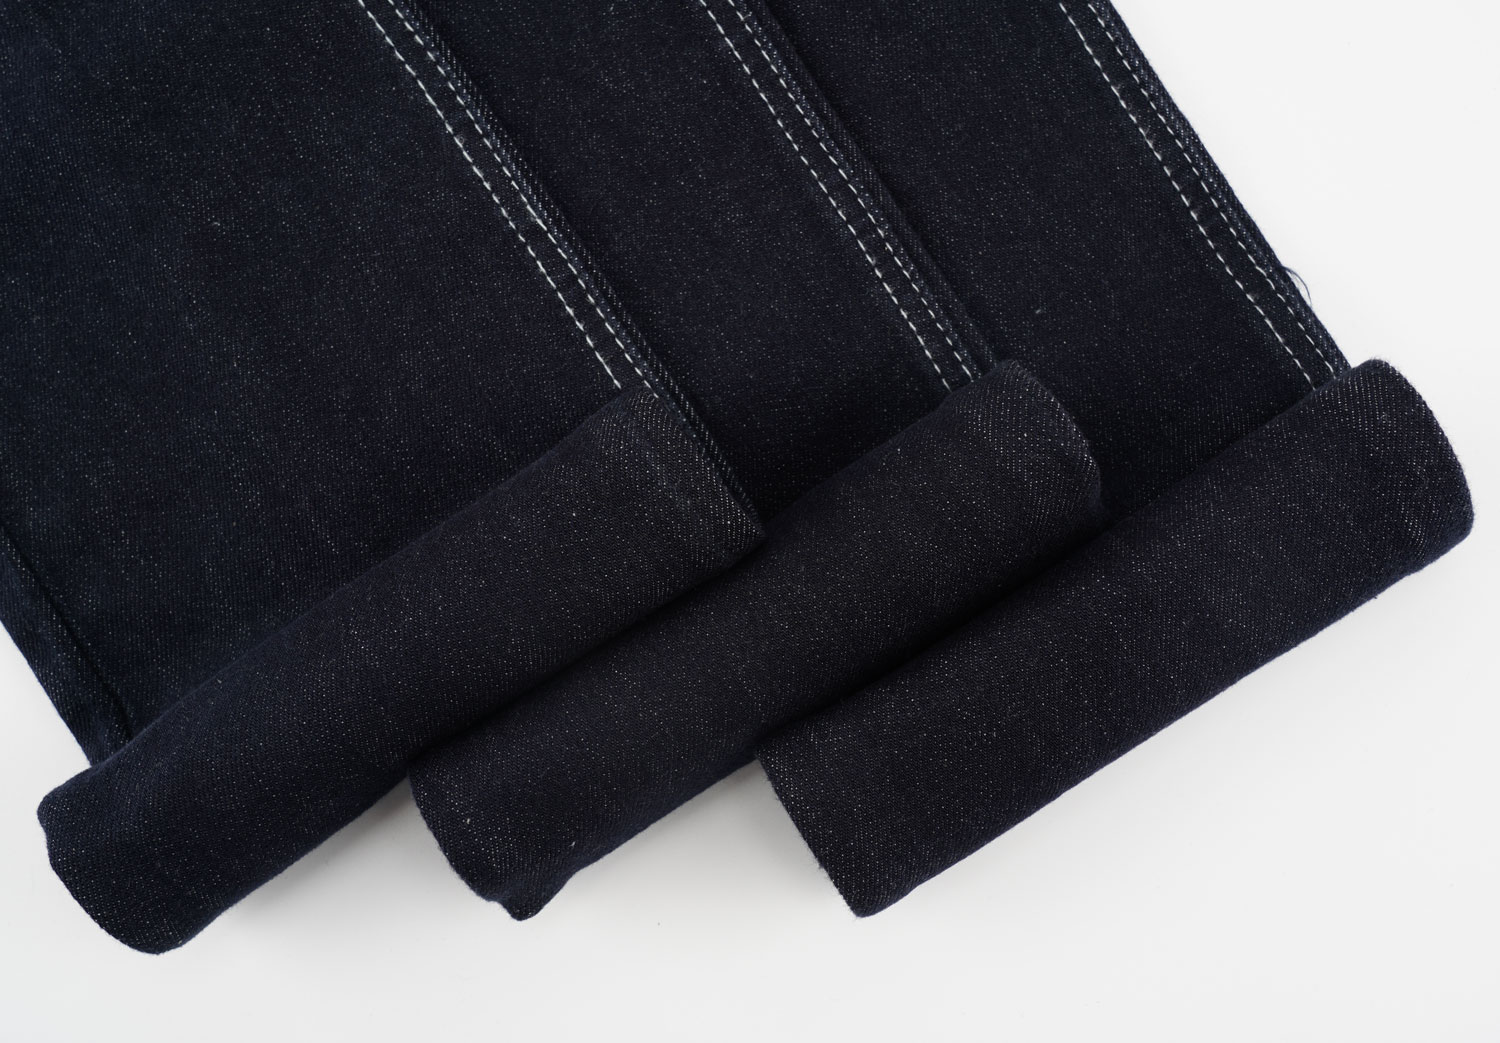 Quality Denim - How to Use the Best One for Your Needs 1